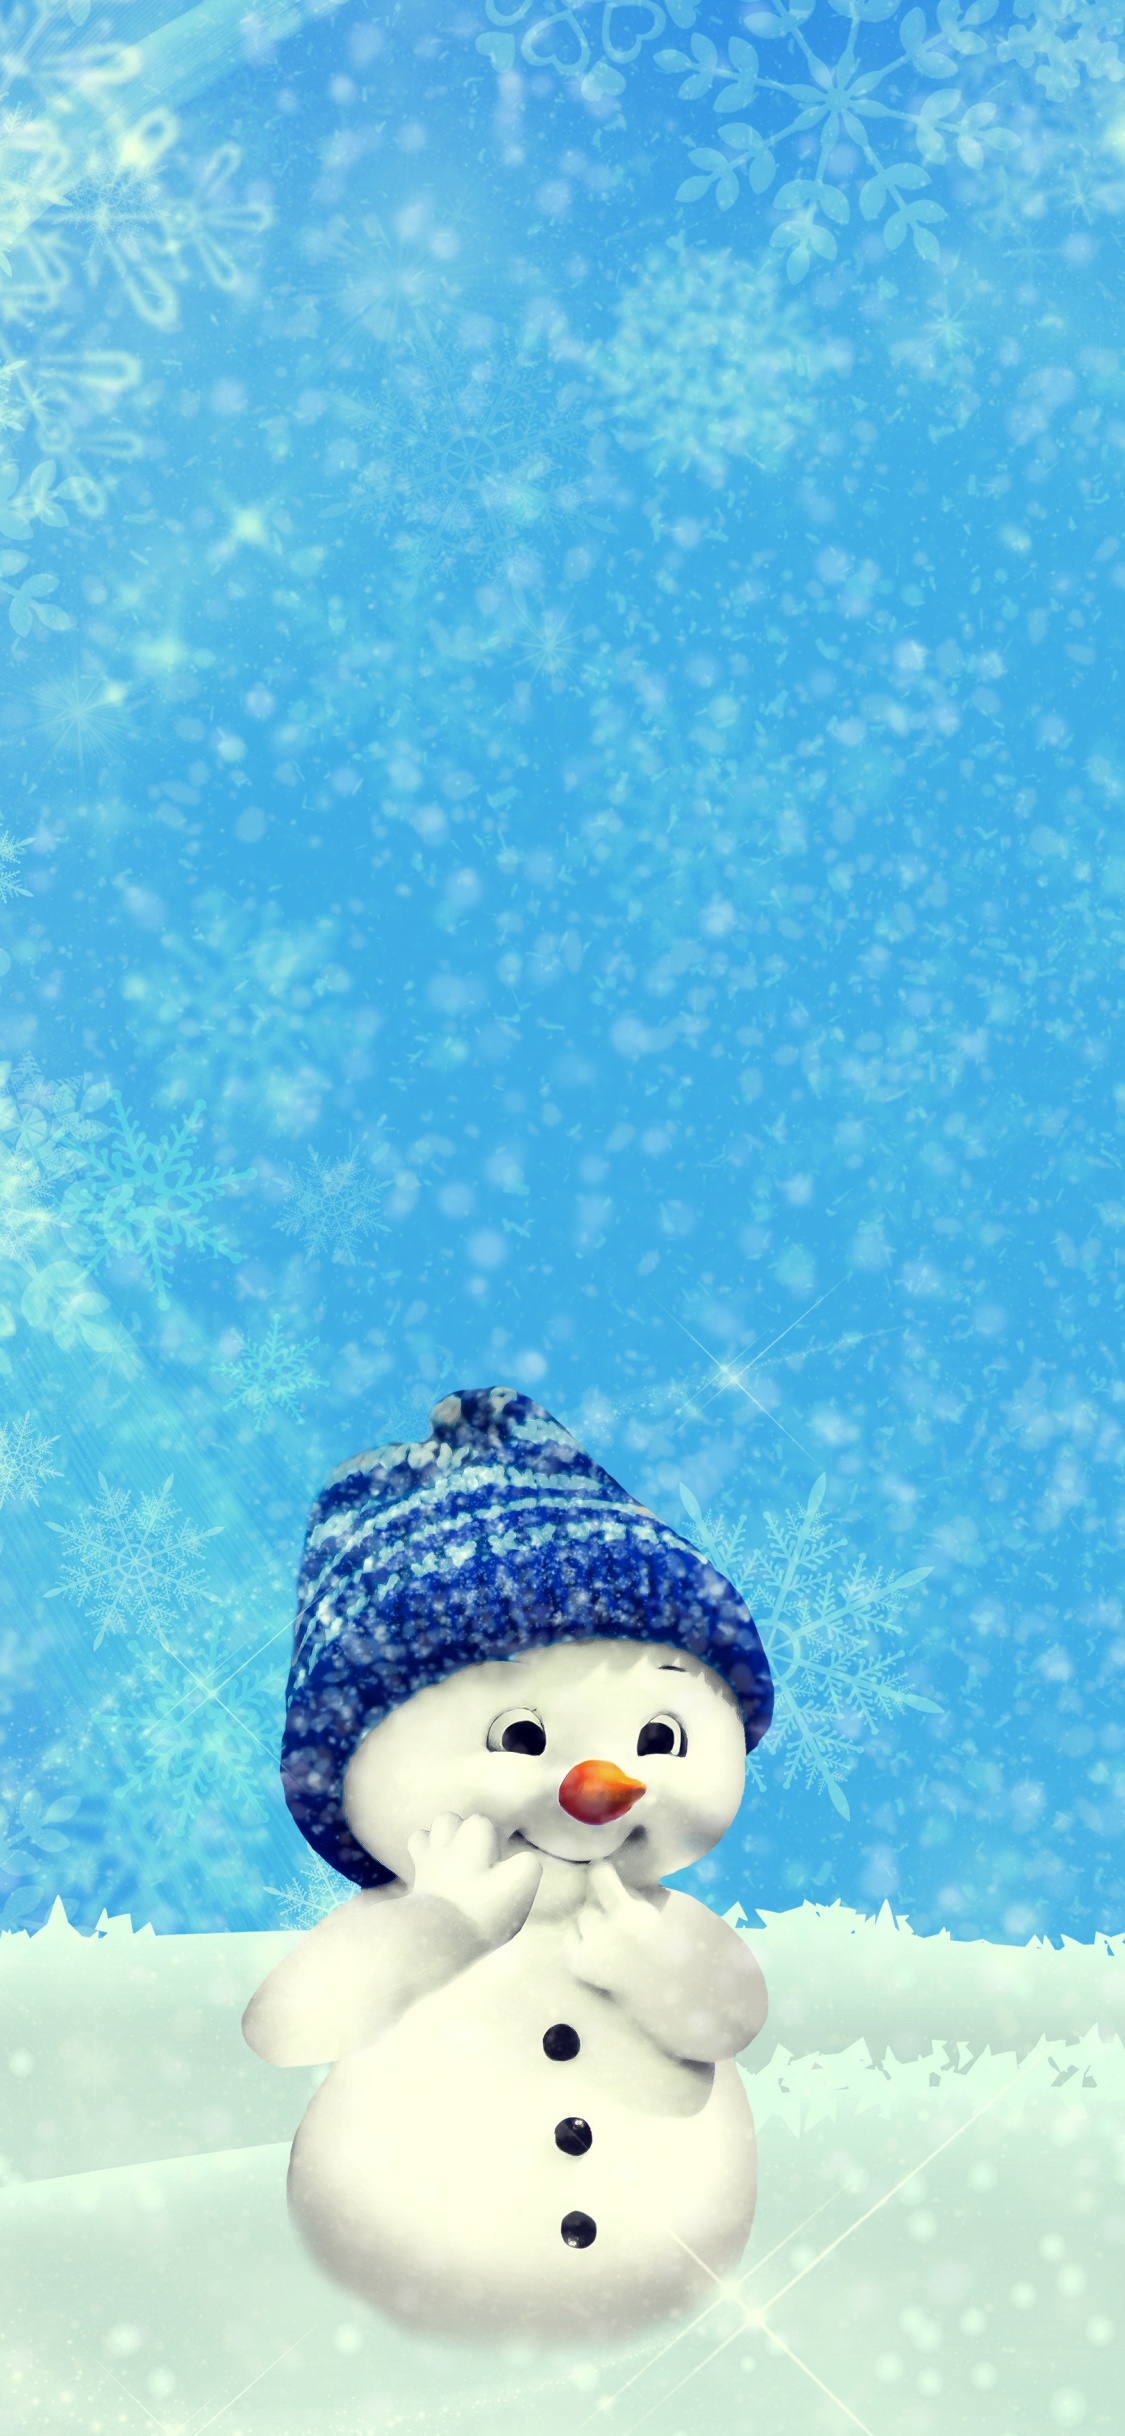 Snowman, Christmas Day, Snow, Winter, Freezing. Wallpaper in 1125x2436 Resolution